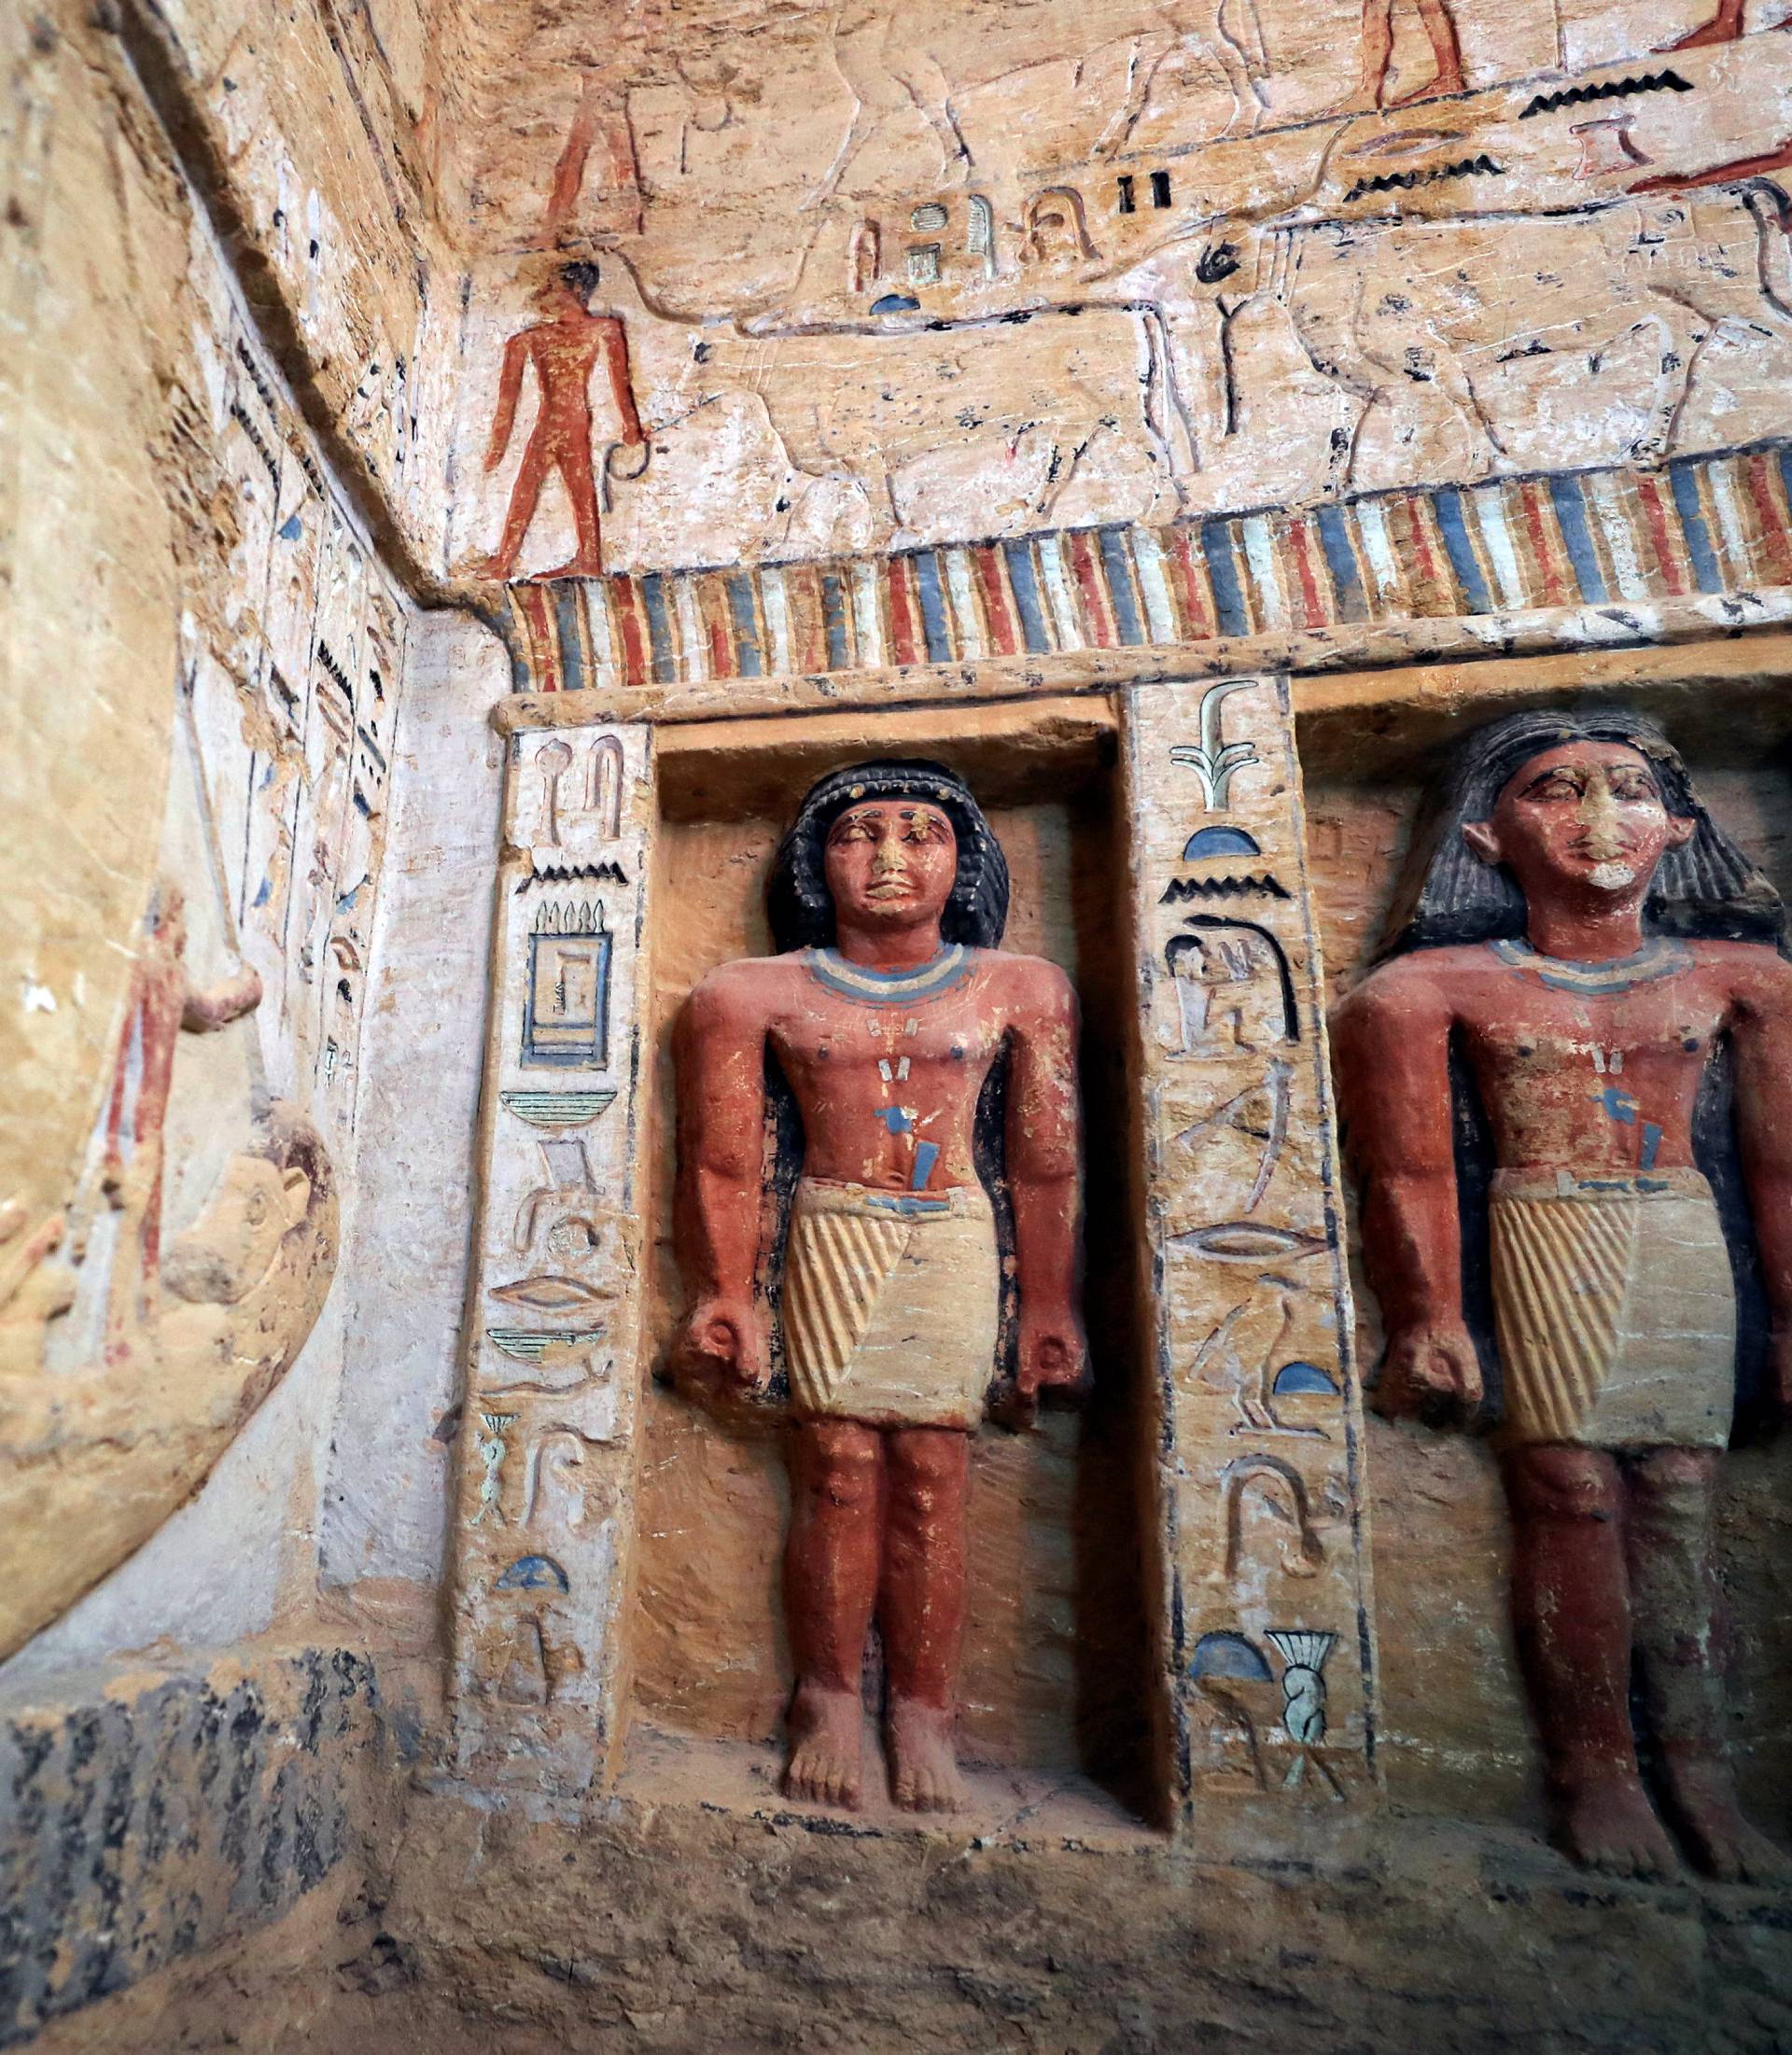 Statues are seen inside the newly-discovered tomb of 'Wahtye', which dates from the rule of King Neferirkare Kakai, at the Saqqara area near its necropolis, in Giza